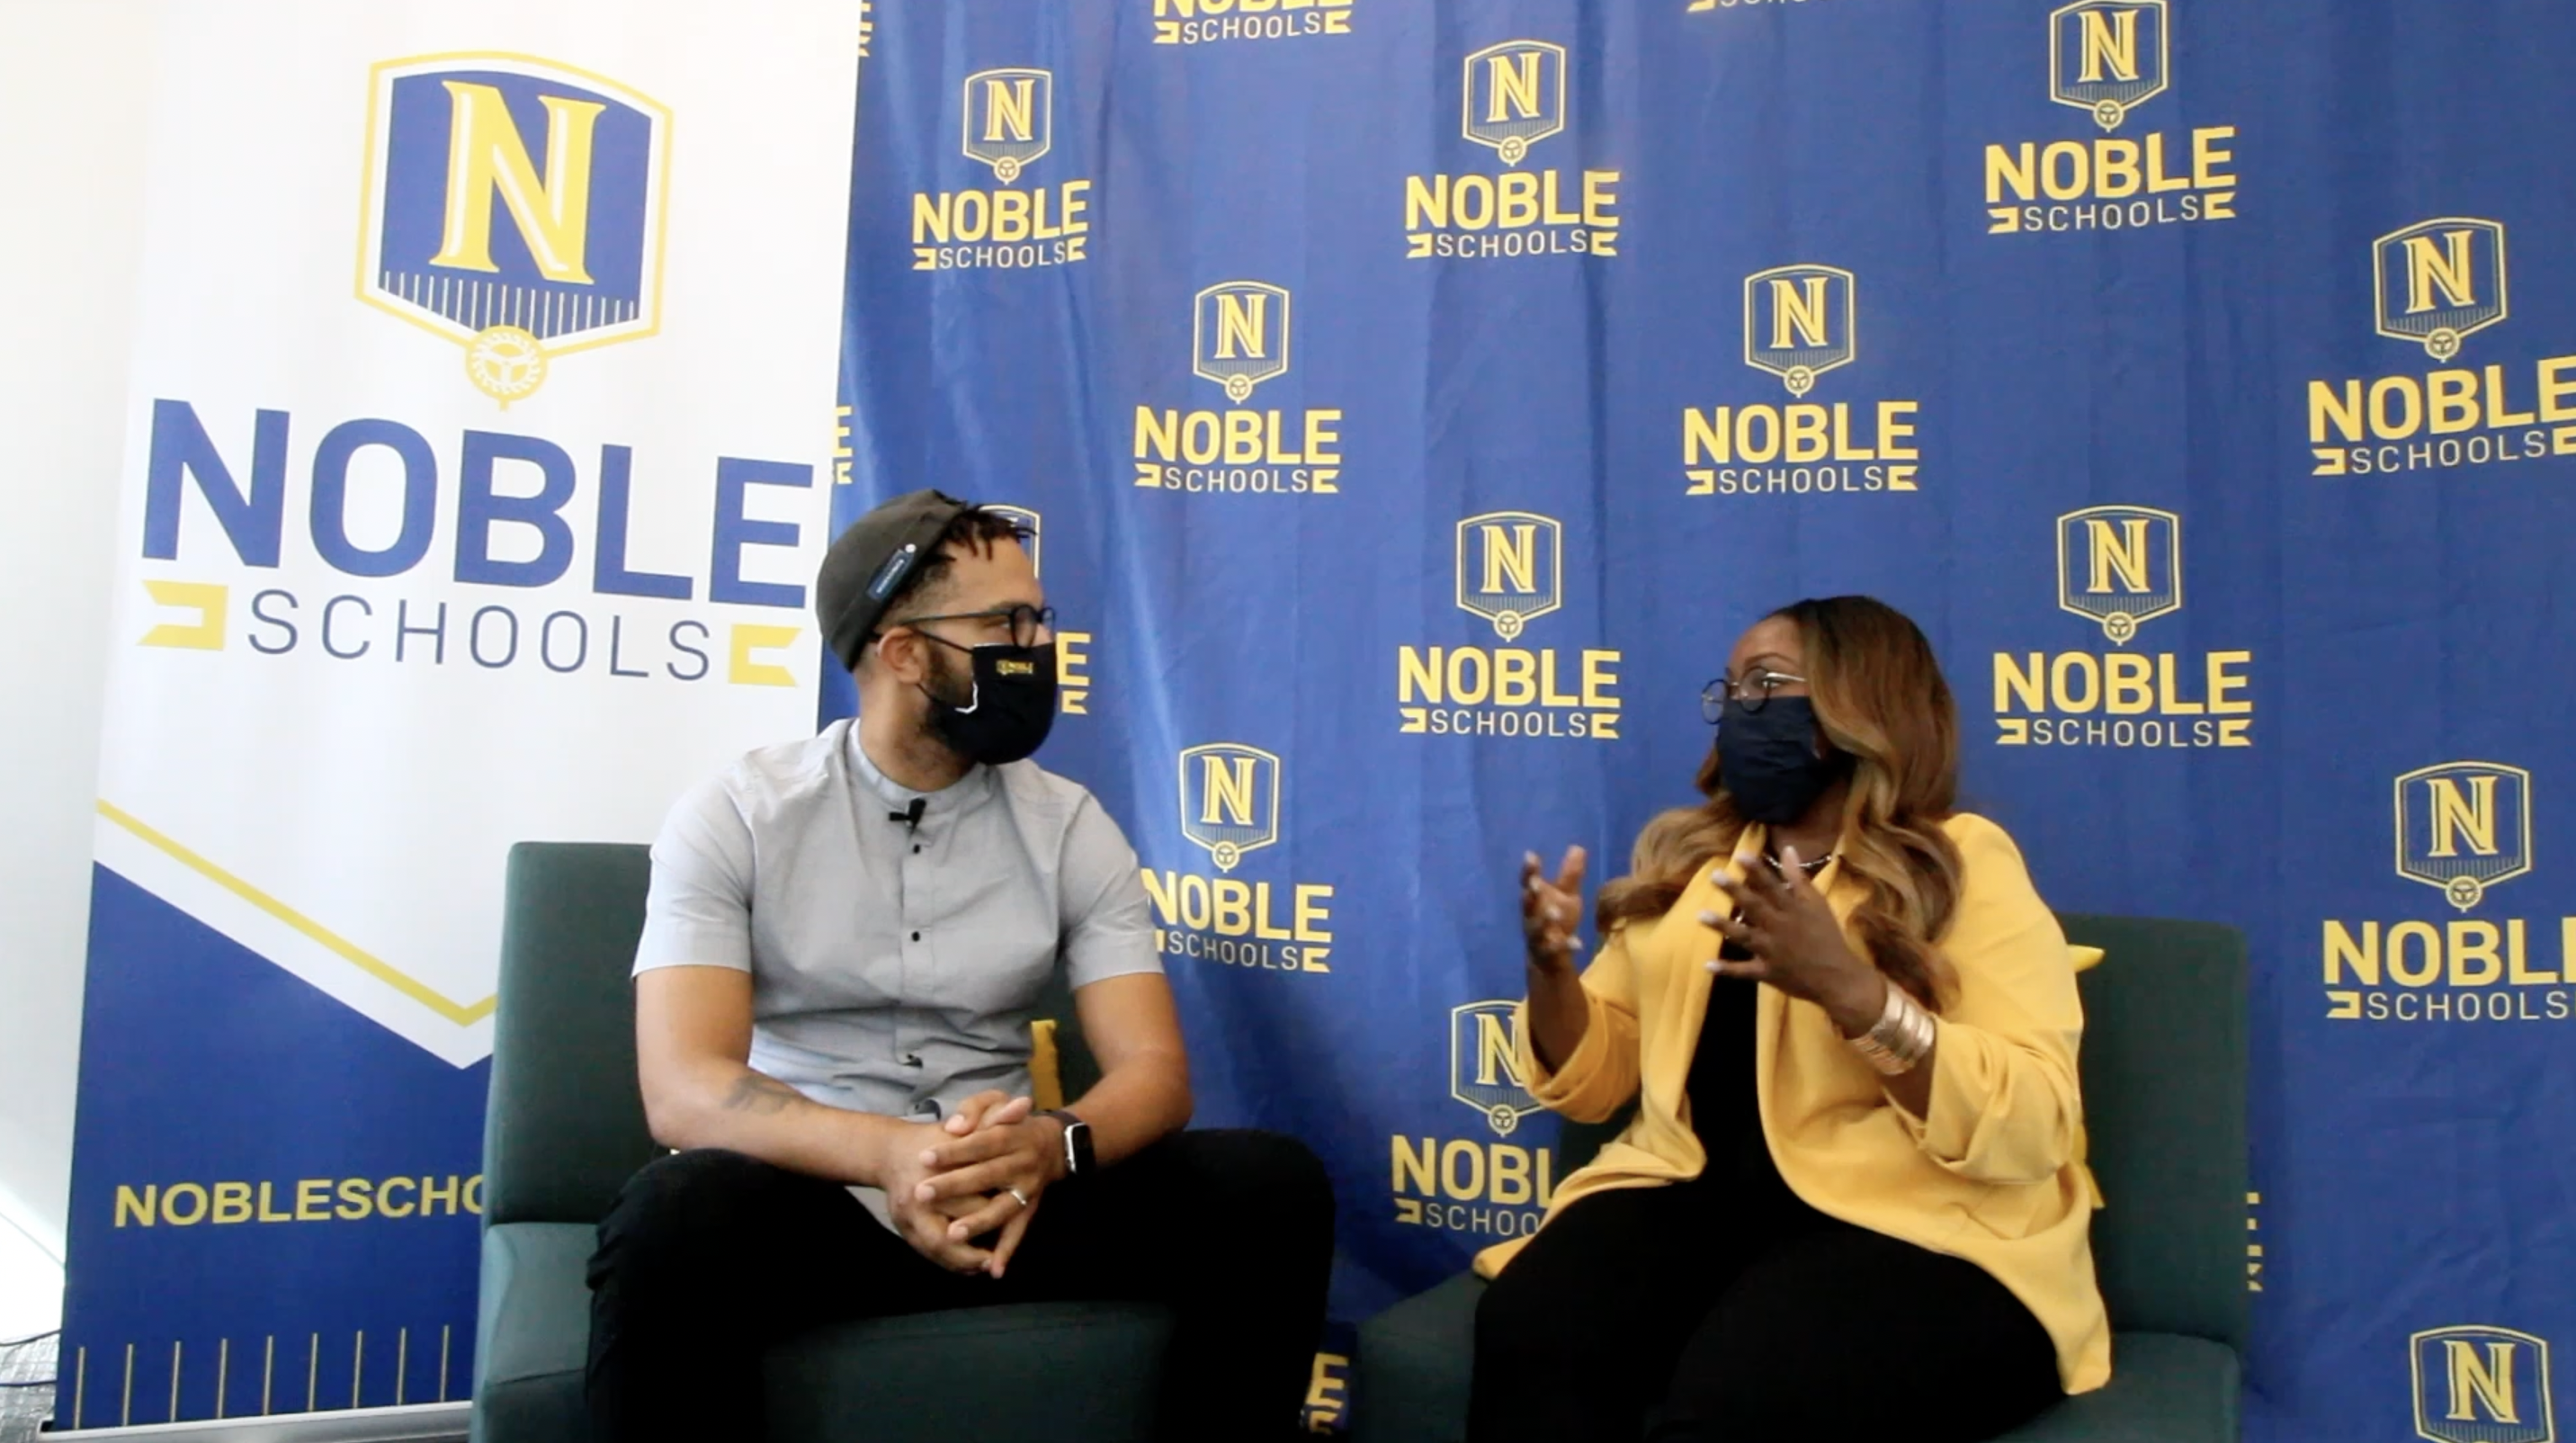 Photo shows Dr. Janine Franklin and Nicholas Jones, Student Culture and Support staff at Noble Schools, on the set of Changing the Course: Building An Antiracist Education video podcast